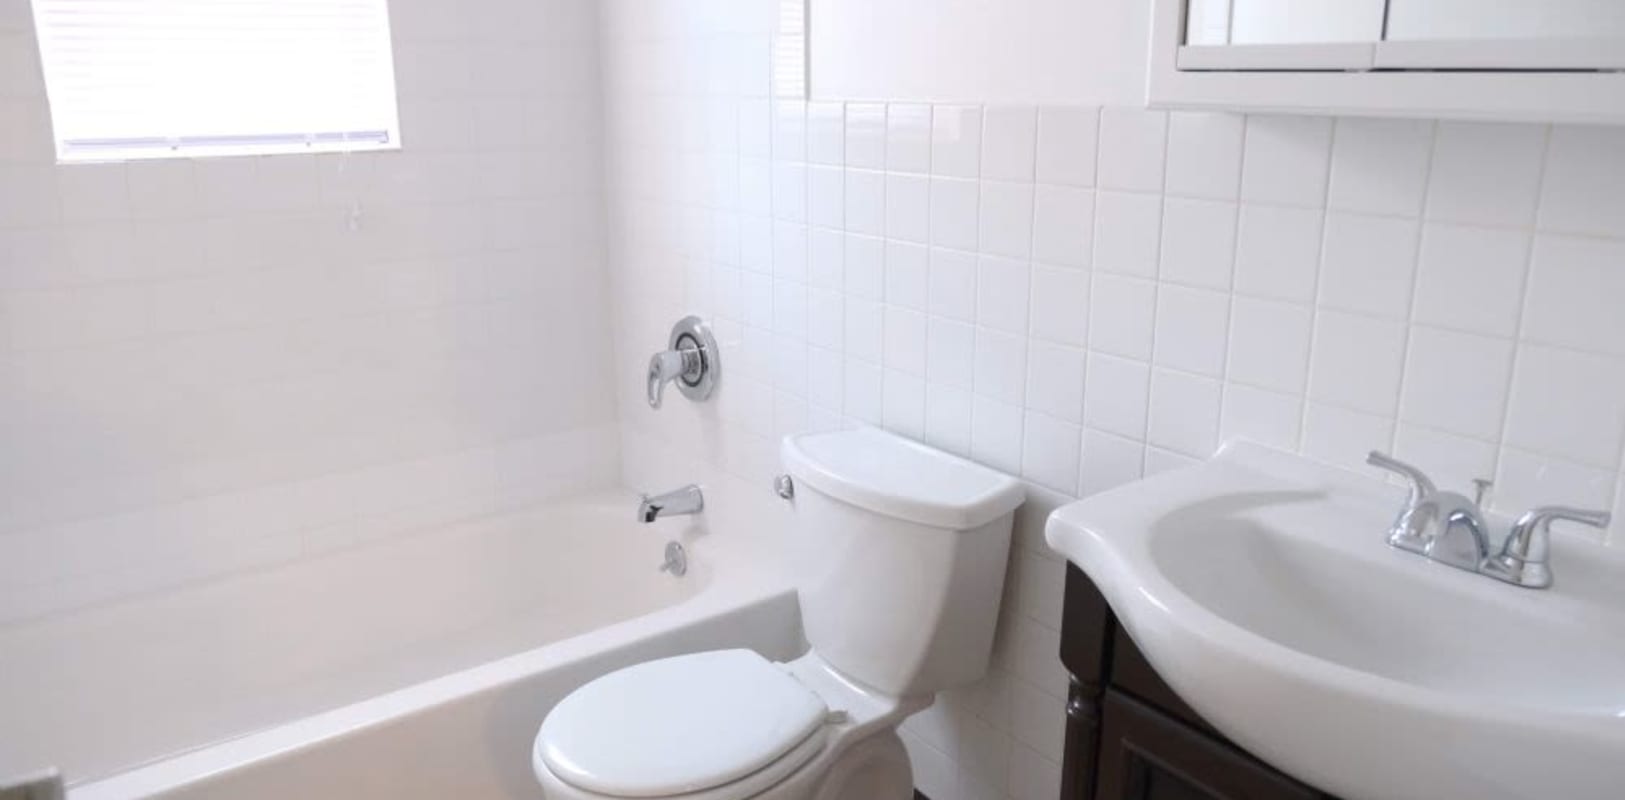 Clean bathroom at Hillside Terrace Apartments in Newton, New Jersey